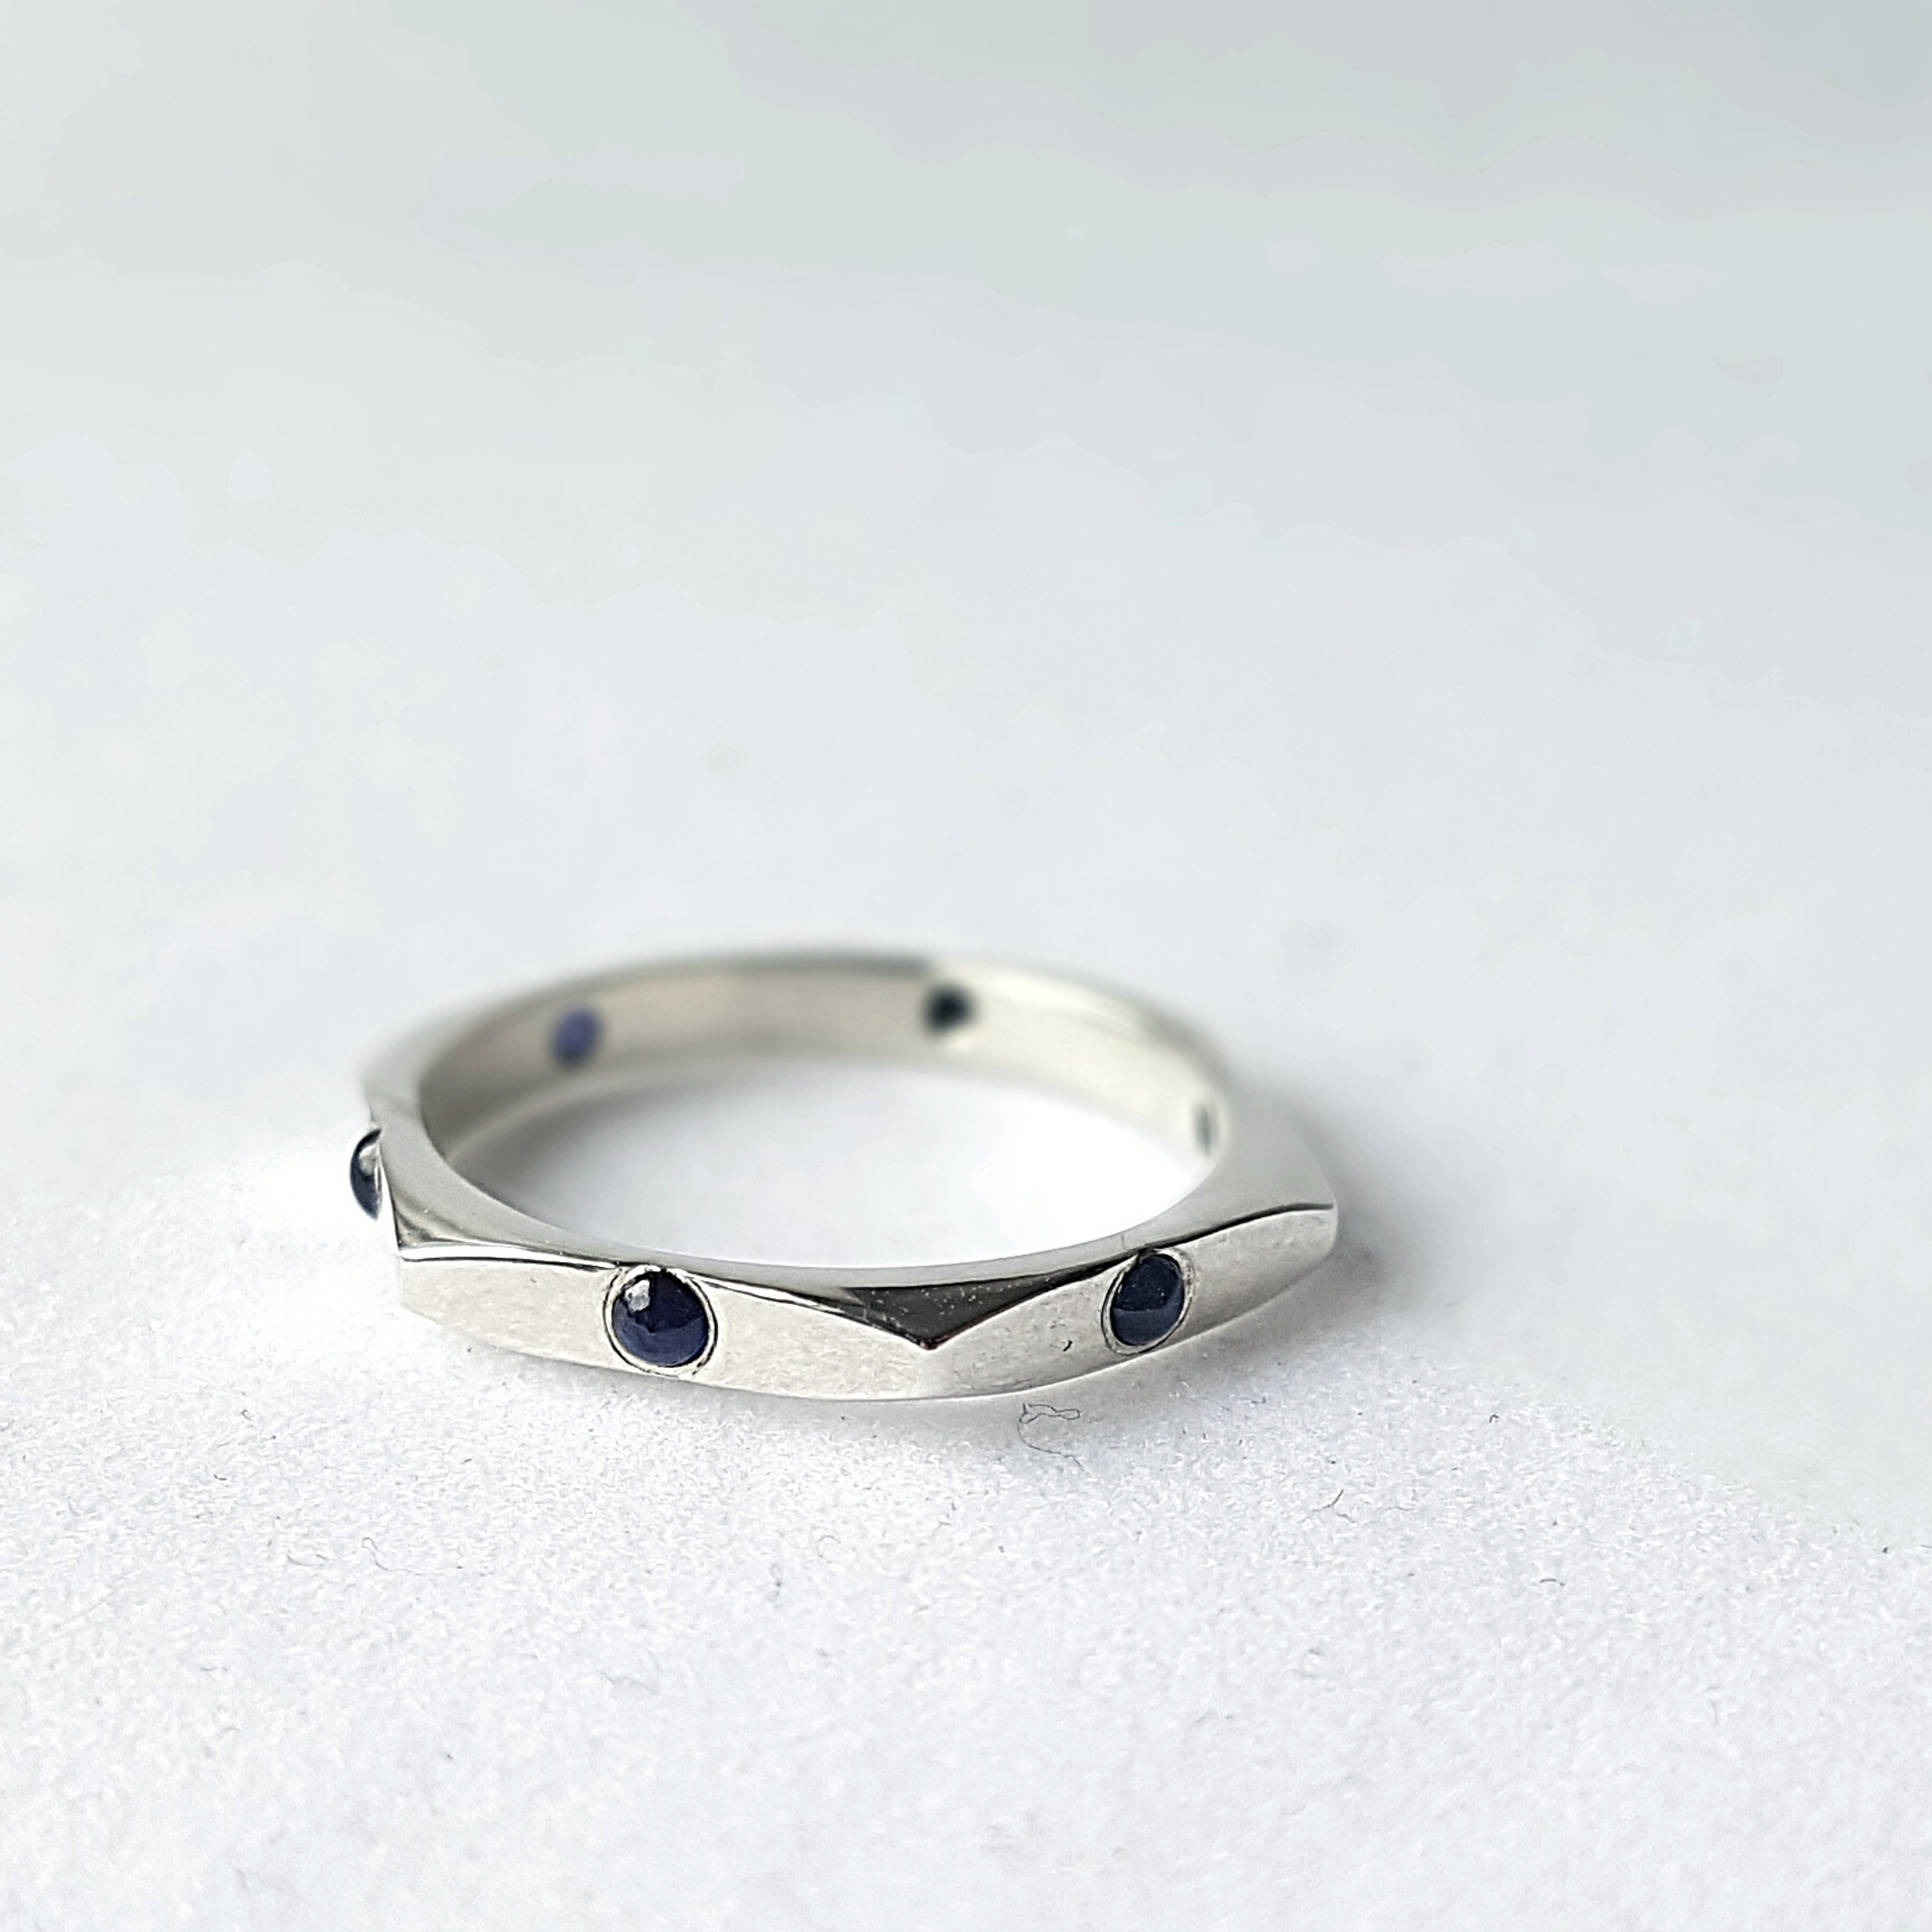 Sterling silver ring with six Cabochon Sapphires is placed on the white surface.